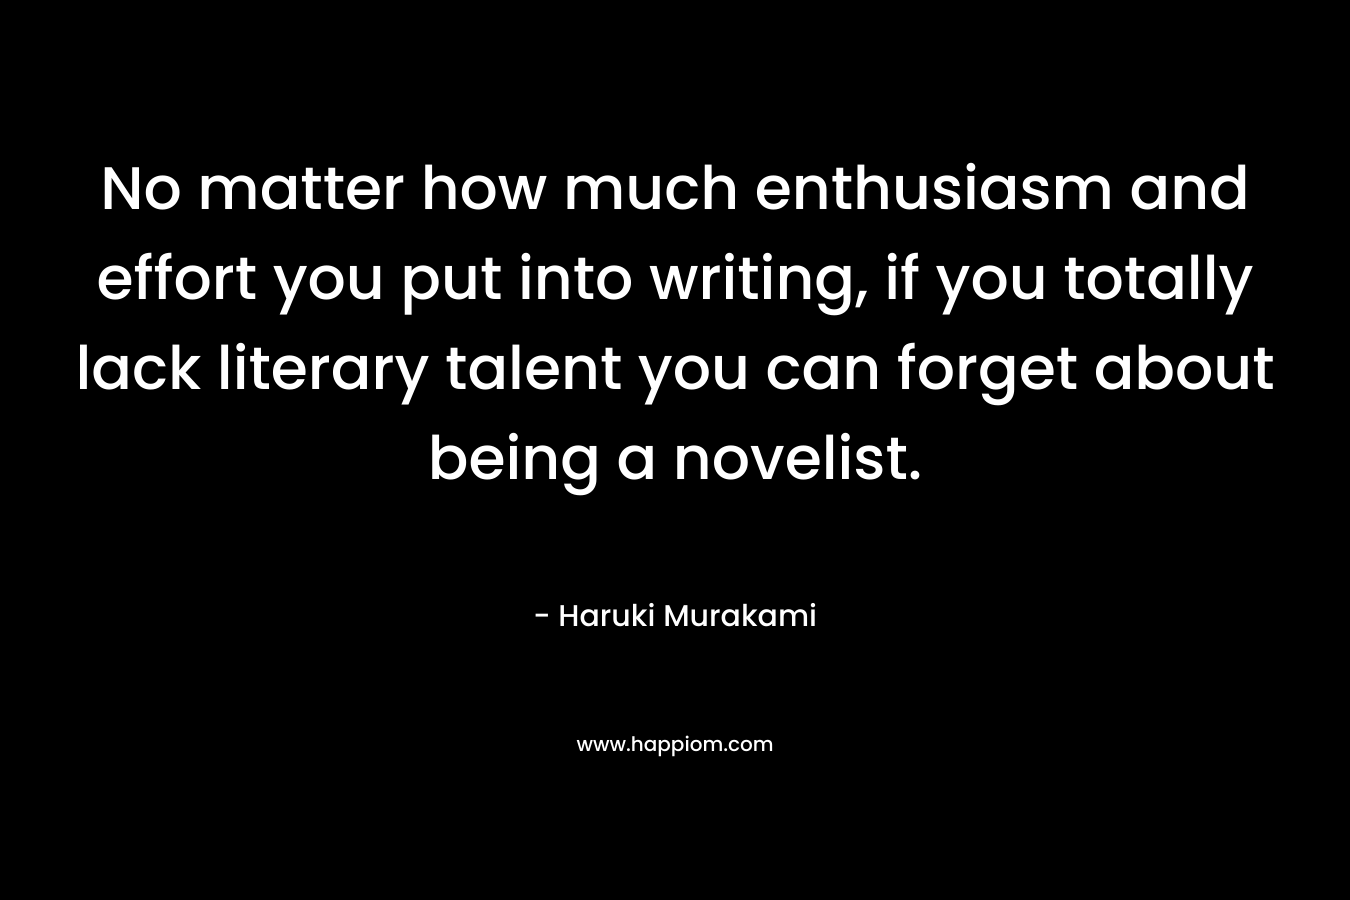 No matter how much enthusiasm and effort you put into writing, if you totally lack literary talent you can forget about being a novelist. – Haruki Murakami